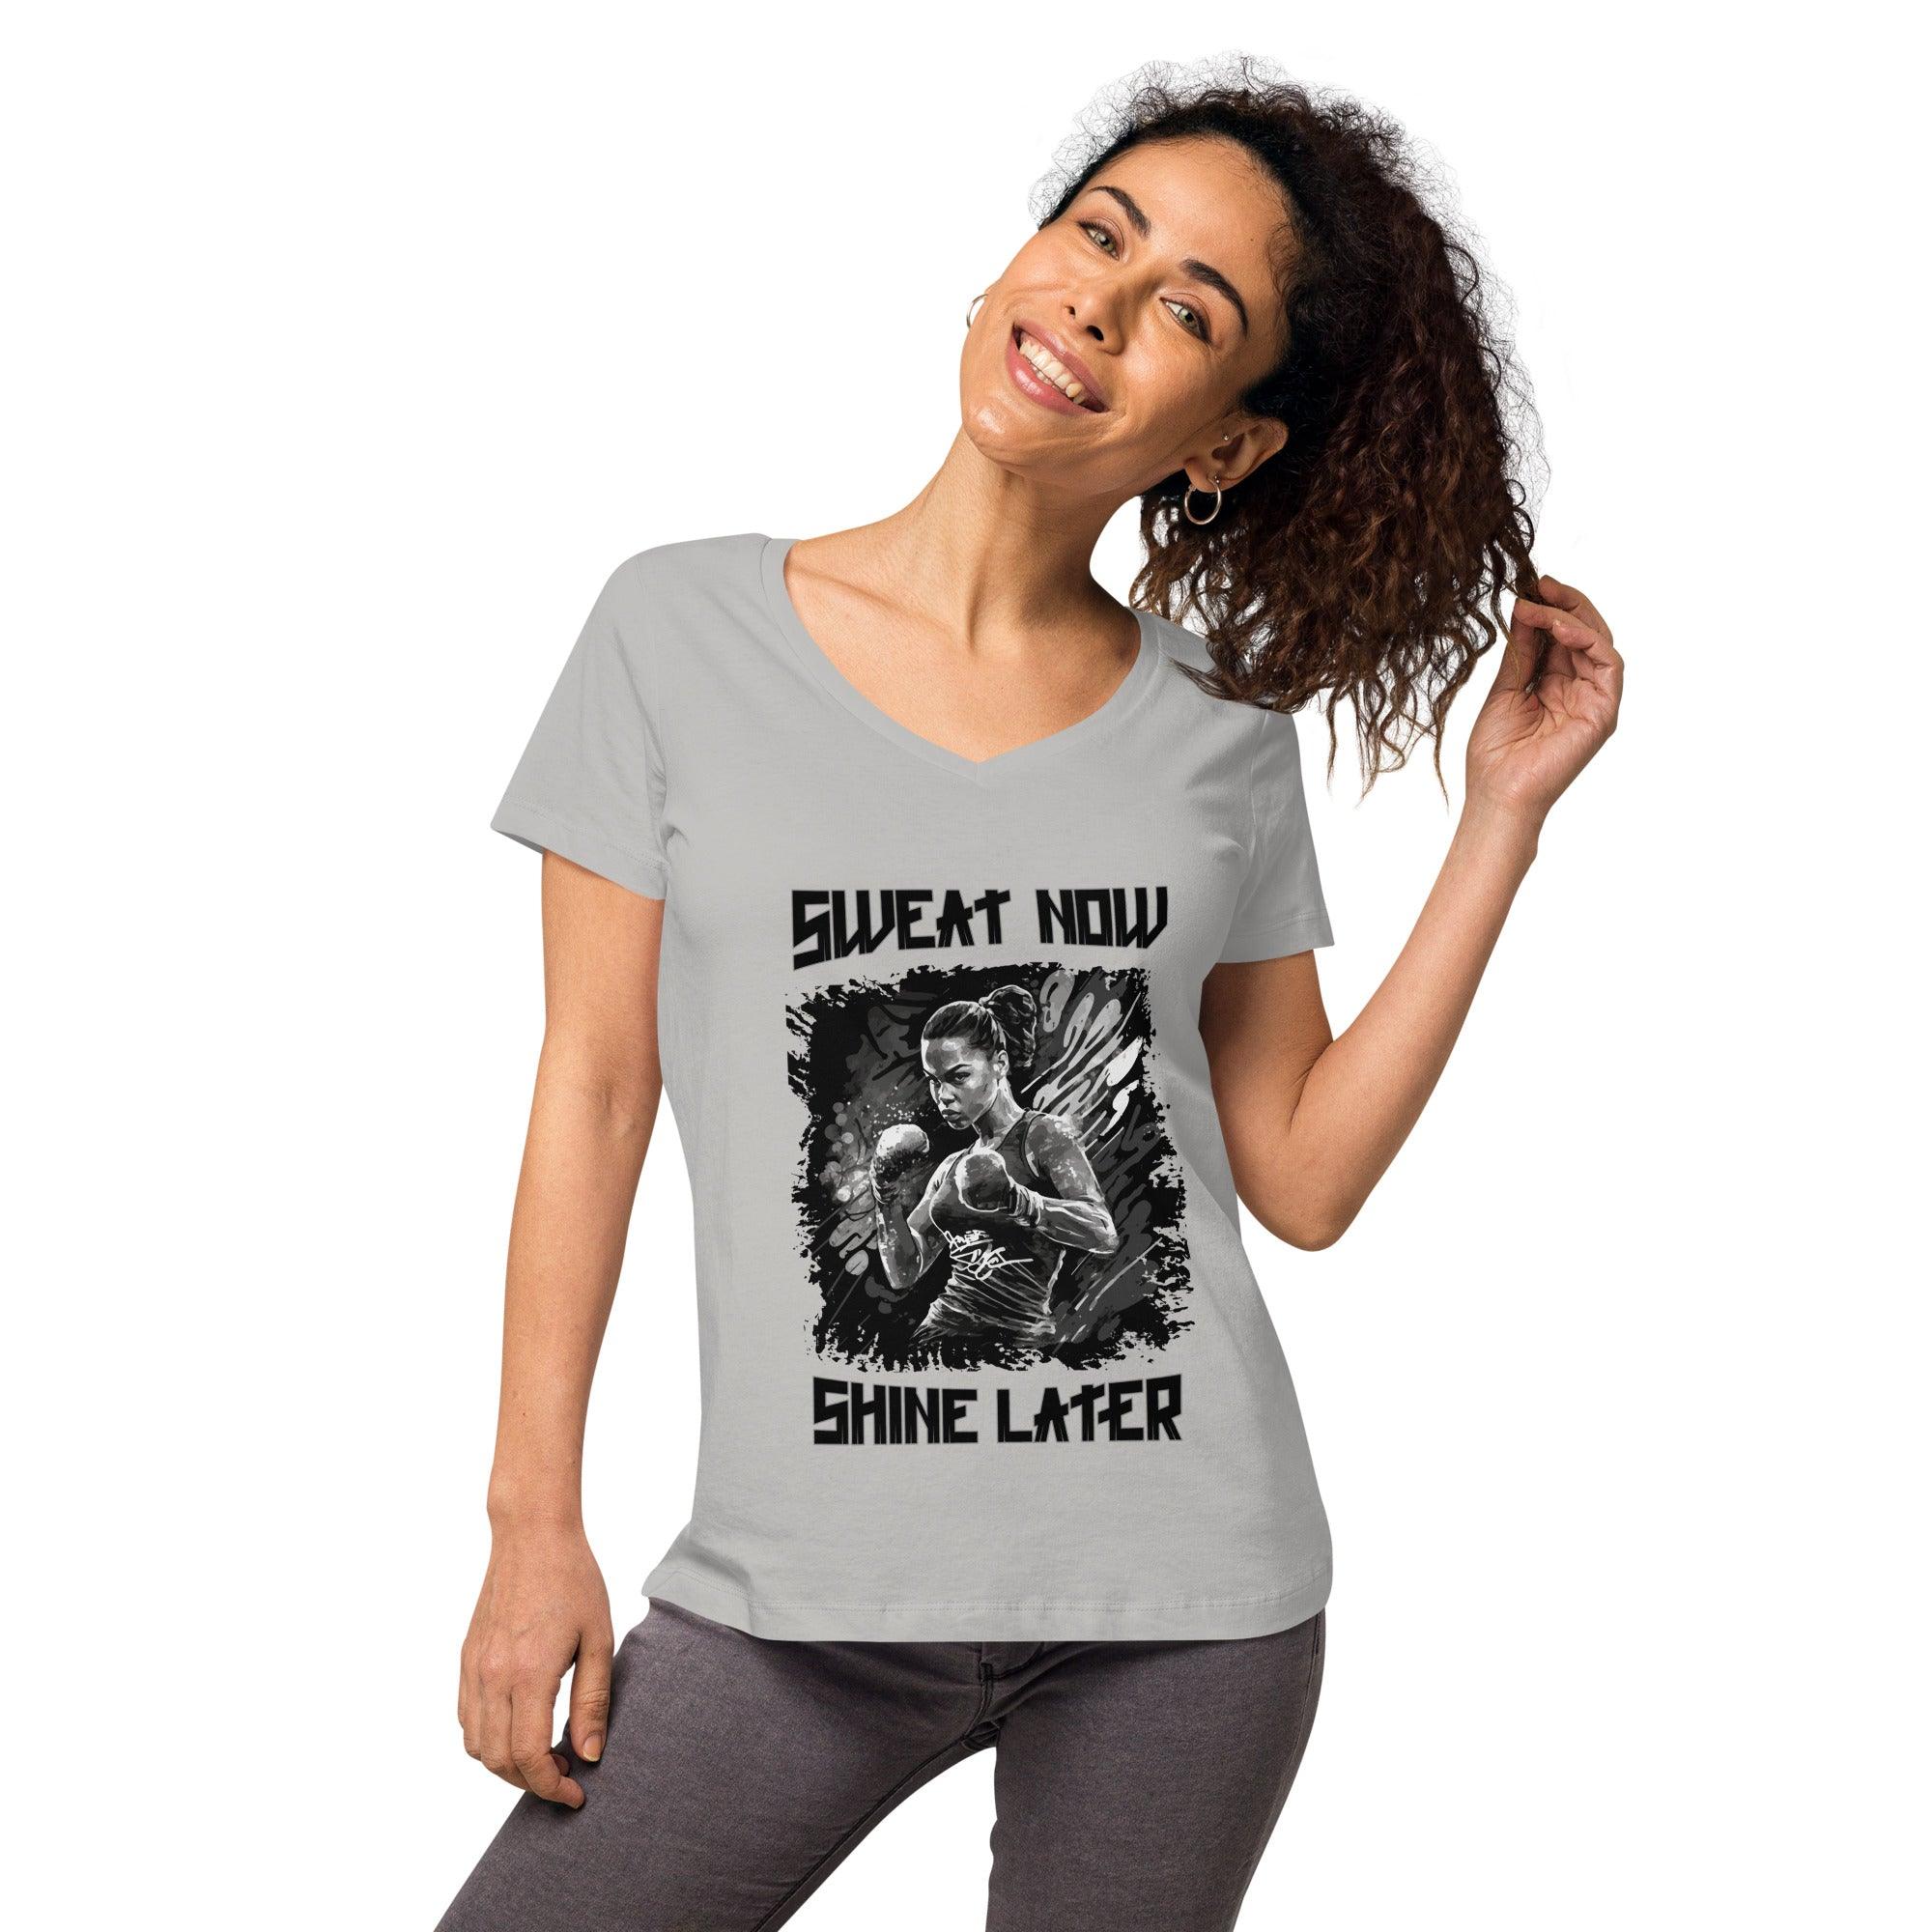 Sweat Now Shine Later Women’s Fitted V-neck T-shirt - Beyond T-shirts